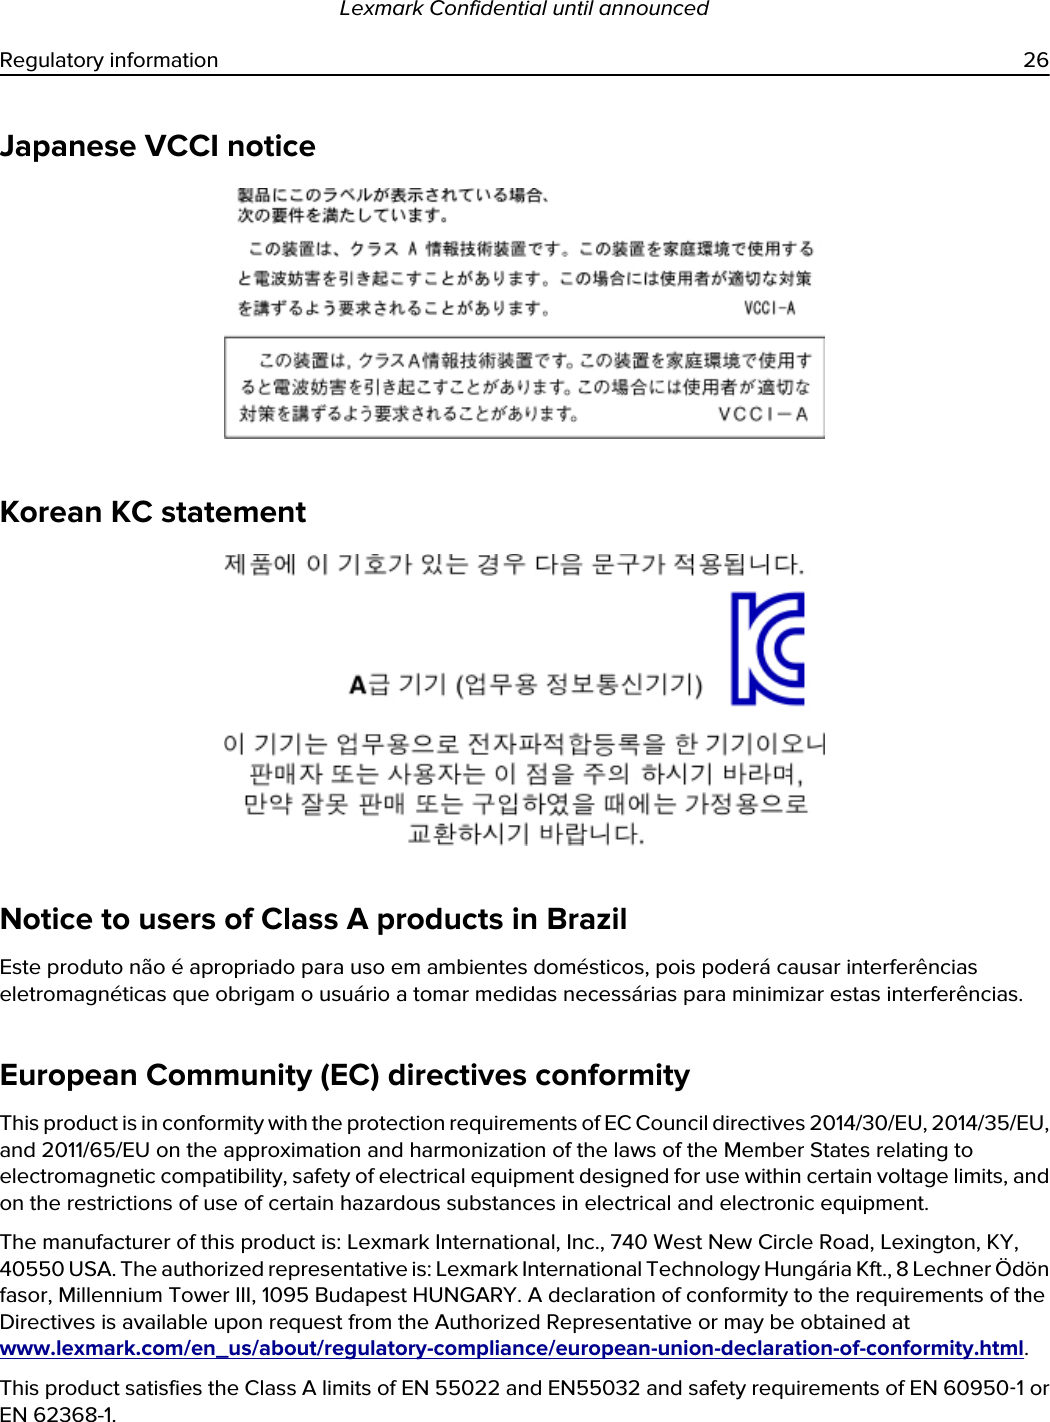 Japanese VCCI noticeKorean KC statementNotice to users of Class A products in BrazilEste produto não é apropriado para uso em ambientes domésticos, pois poderá causar interferências eletromagnéticas que obrigam o usuário a tomar medidas necessárias para minimizar estas interferências.European Community (EC) directives conformityThis product is in conformity with the protection requirements of EC Council directives 2014/30/EU, 2014/35/EU, and 2011/65/EU on the approximation and harmonization of the laws of the Member States relating to electromagnetic compatibility, safety of electrical equipment designed for use within certain voltage limits, and on the restrictions of use of certain hazardous substances in electrical and electronic equipment.The manufacturer of this product is: Lexmark International, Inc., 740 West New Circle Road, Lexington, KY, 40550 USA. The authorized representative is: Lexmark International Technology Hungária Kft., 8 Lechner Ödön fasor, Millennium Tower III, 1095 Budapest HUNGARY. A declaration of conformity to the requirements of the Directives is available upon request from the Authorized Representative or may be obtained at www.lexmark.com/en_us/about/regulatory-compliance/european-union-declaration-of-conformity.html.This product satisfies the Class A limits of EN 55022 and EN55032 and safety requirements of EN 60950‑1 or EN 62368-1.Lexmark Confidential until announcedRegulatory information 26